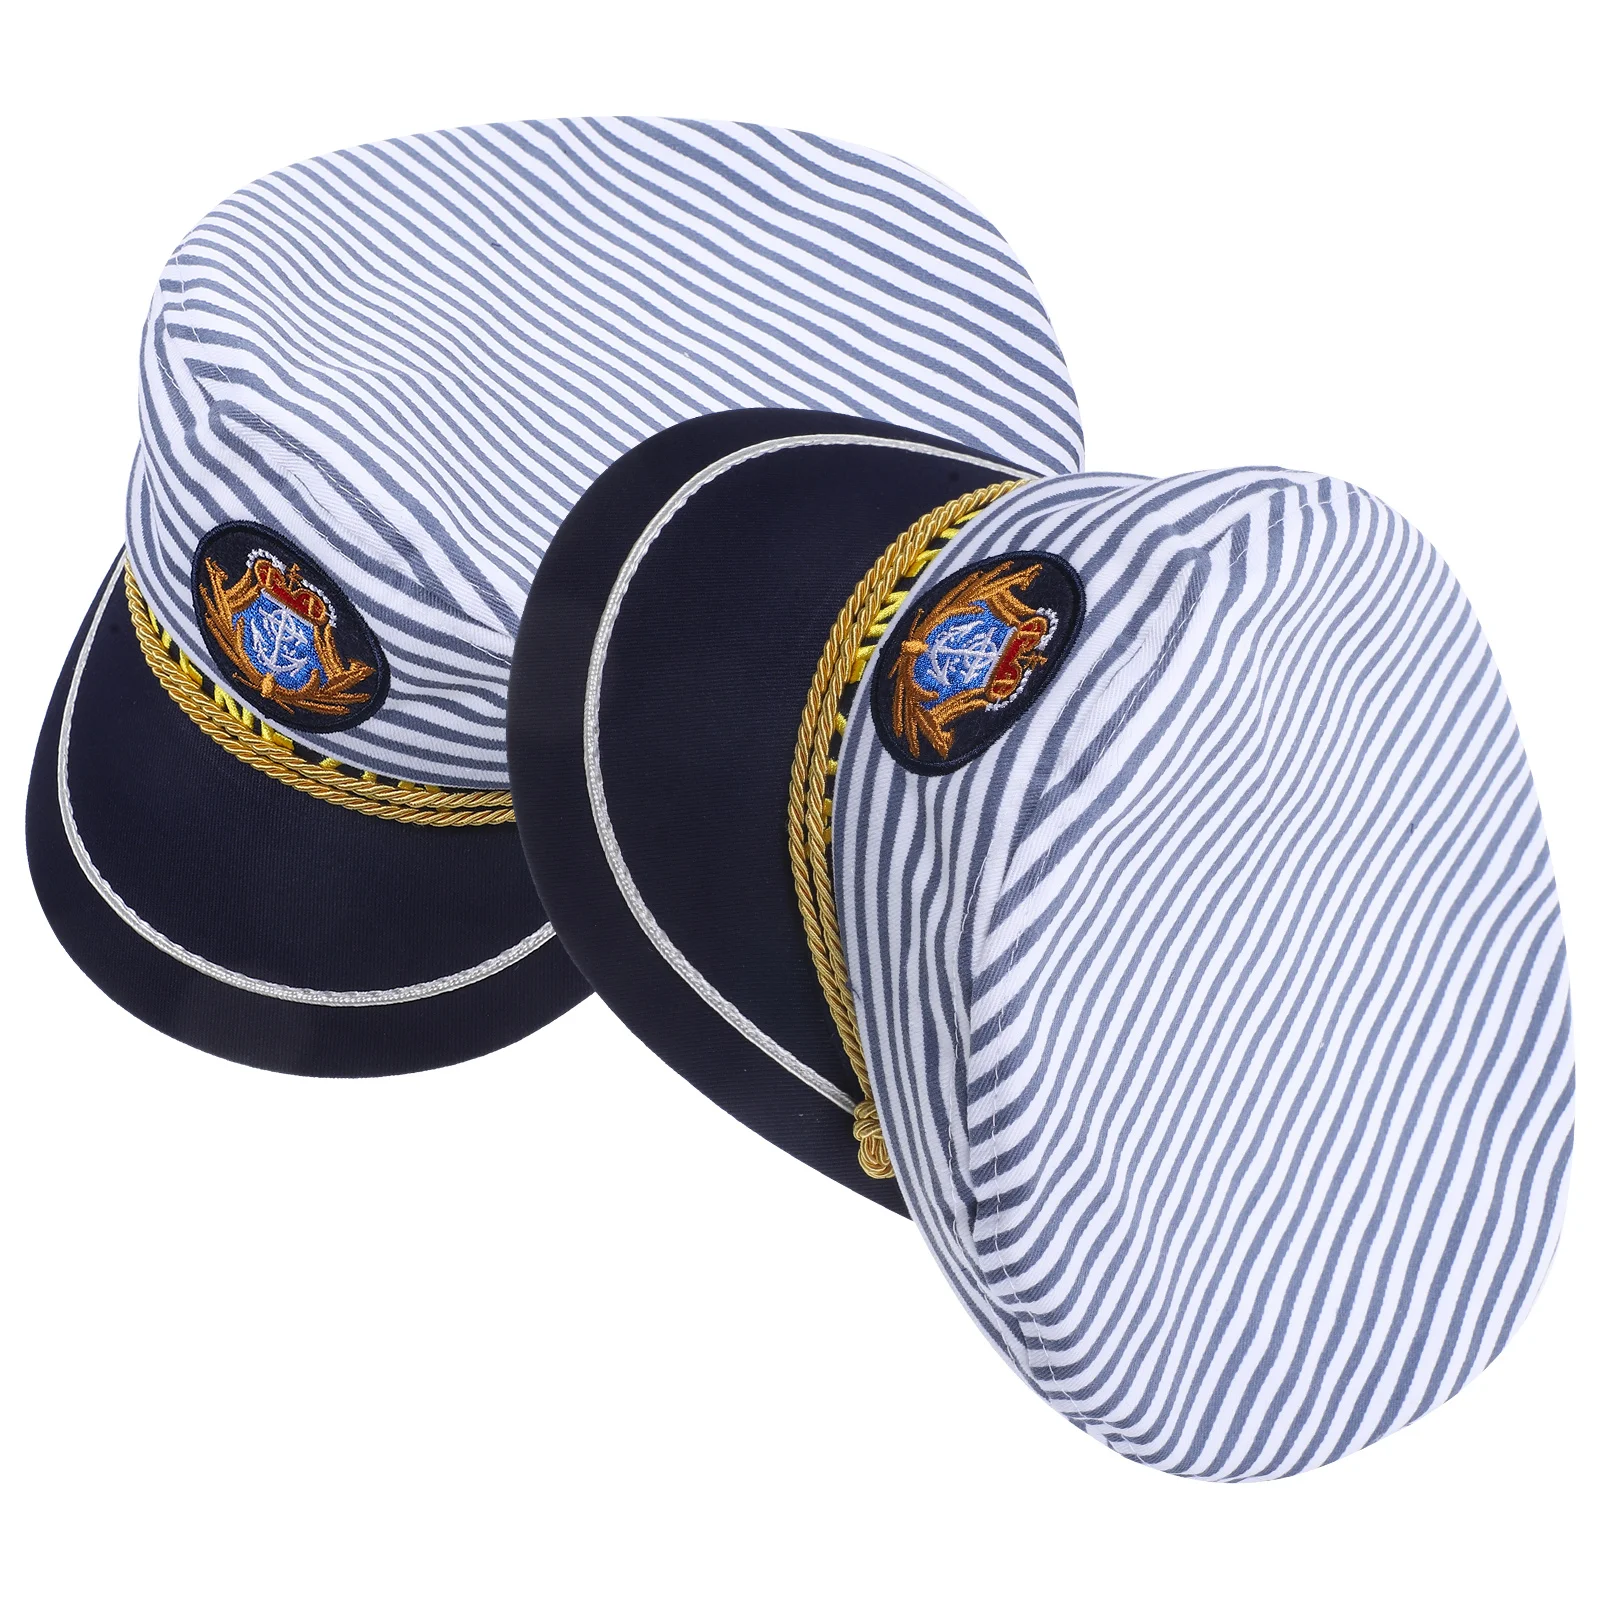 

2 Pcs Accessories Men Captain Hat Adult Boat Gifts Girl Captains Boating Sailing Cotton Hats Boaters Sailor Women's